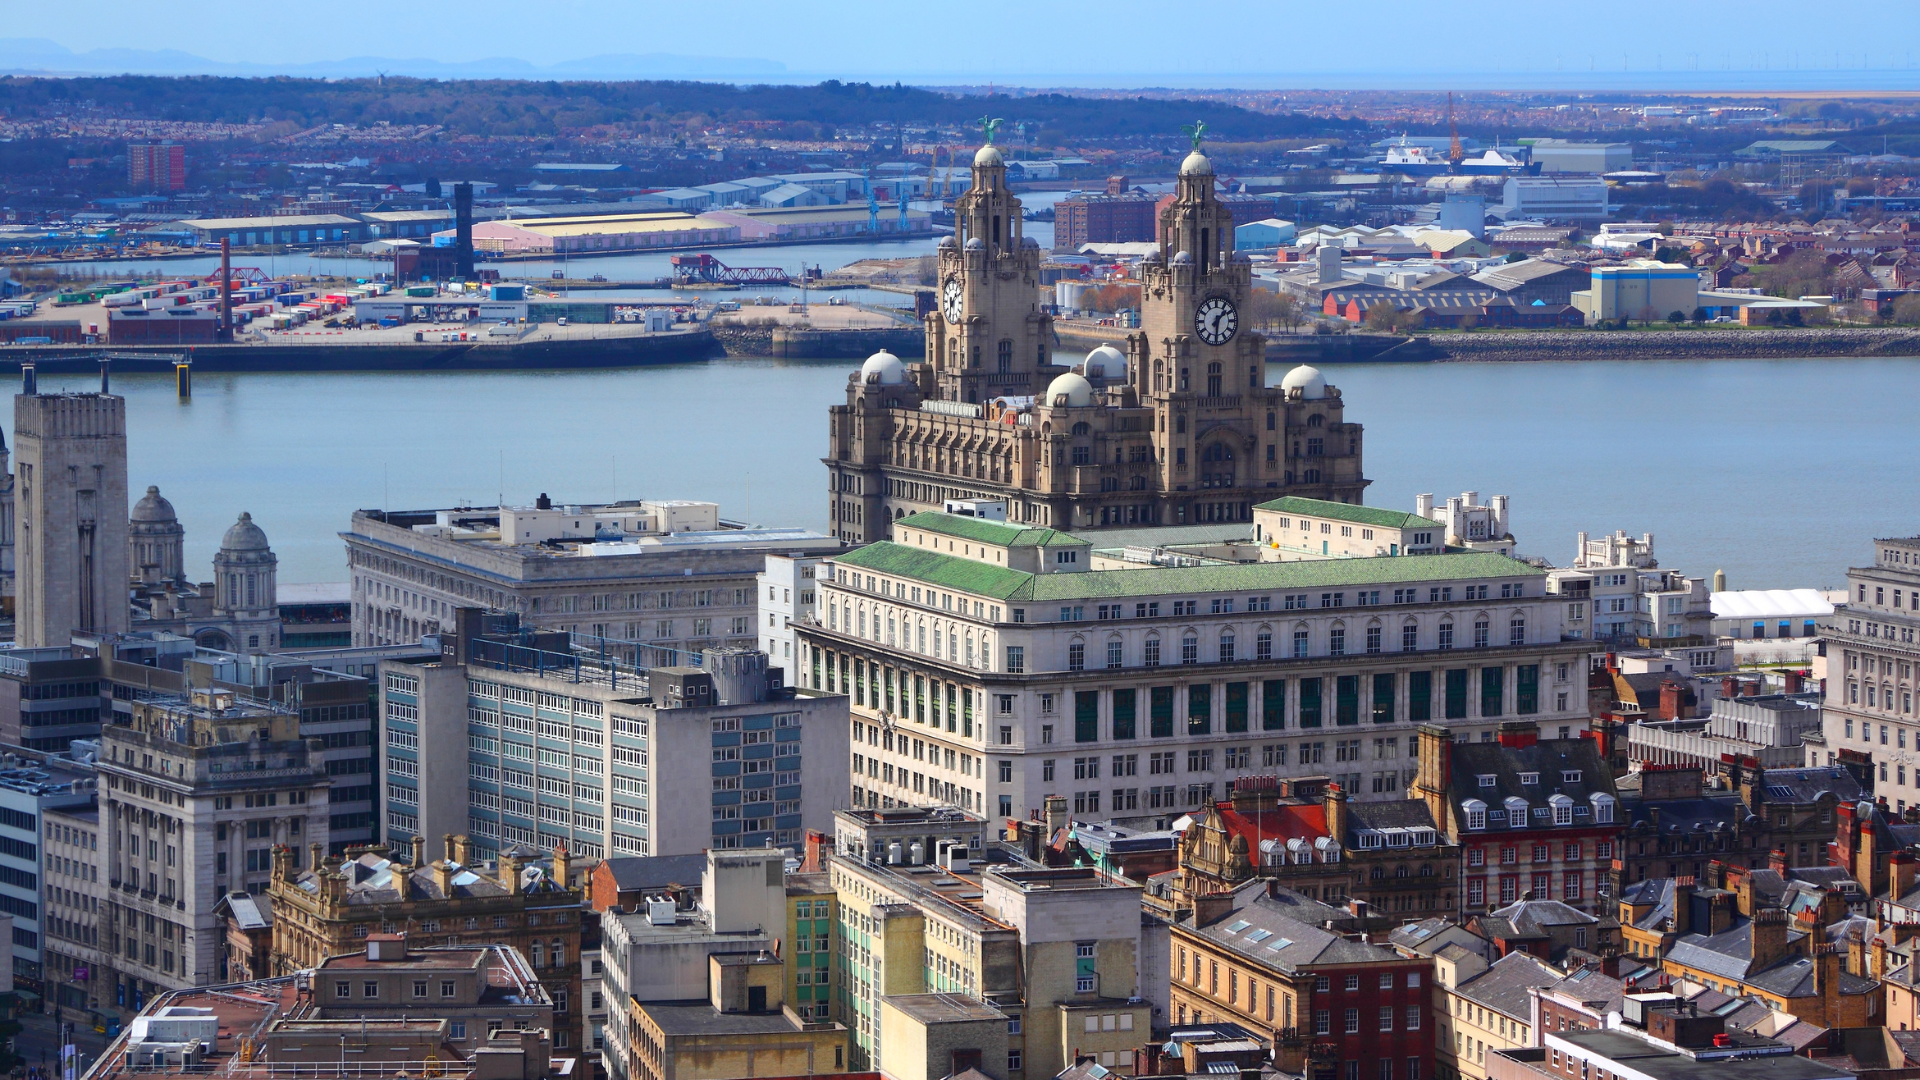 The skyline of Liverpool from above